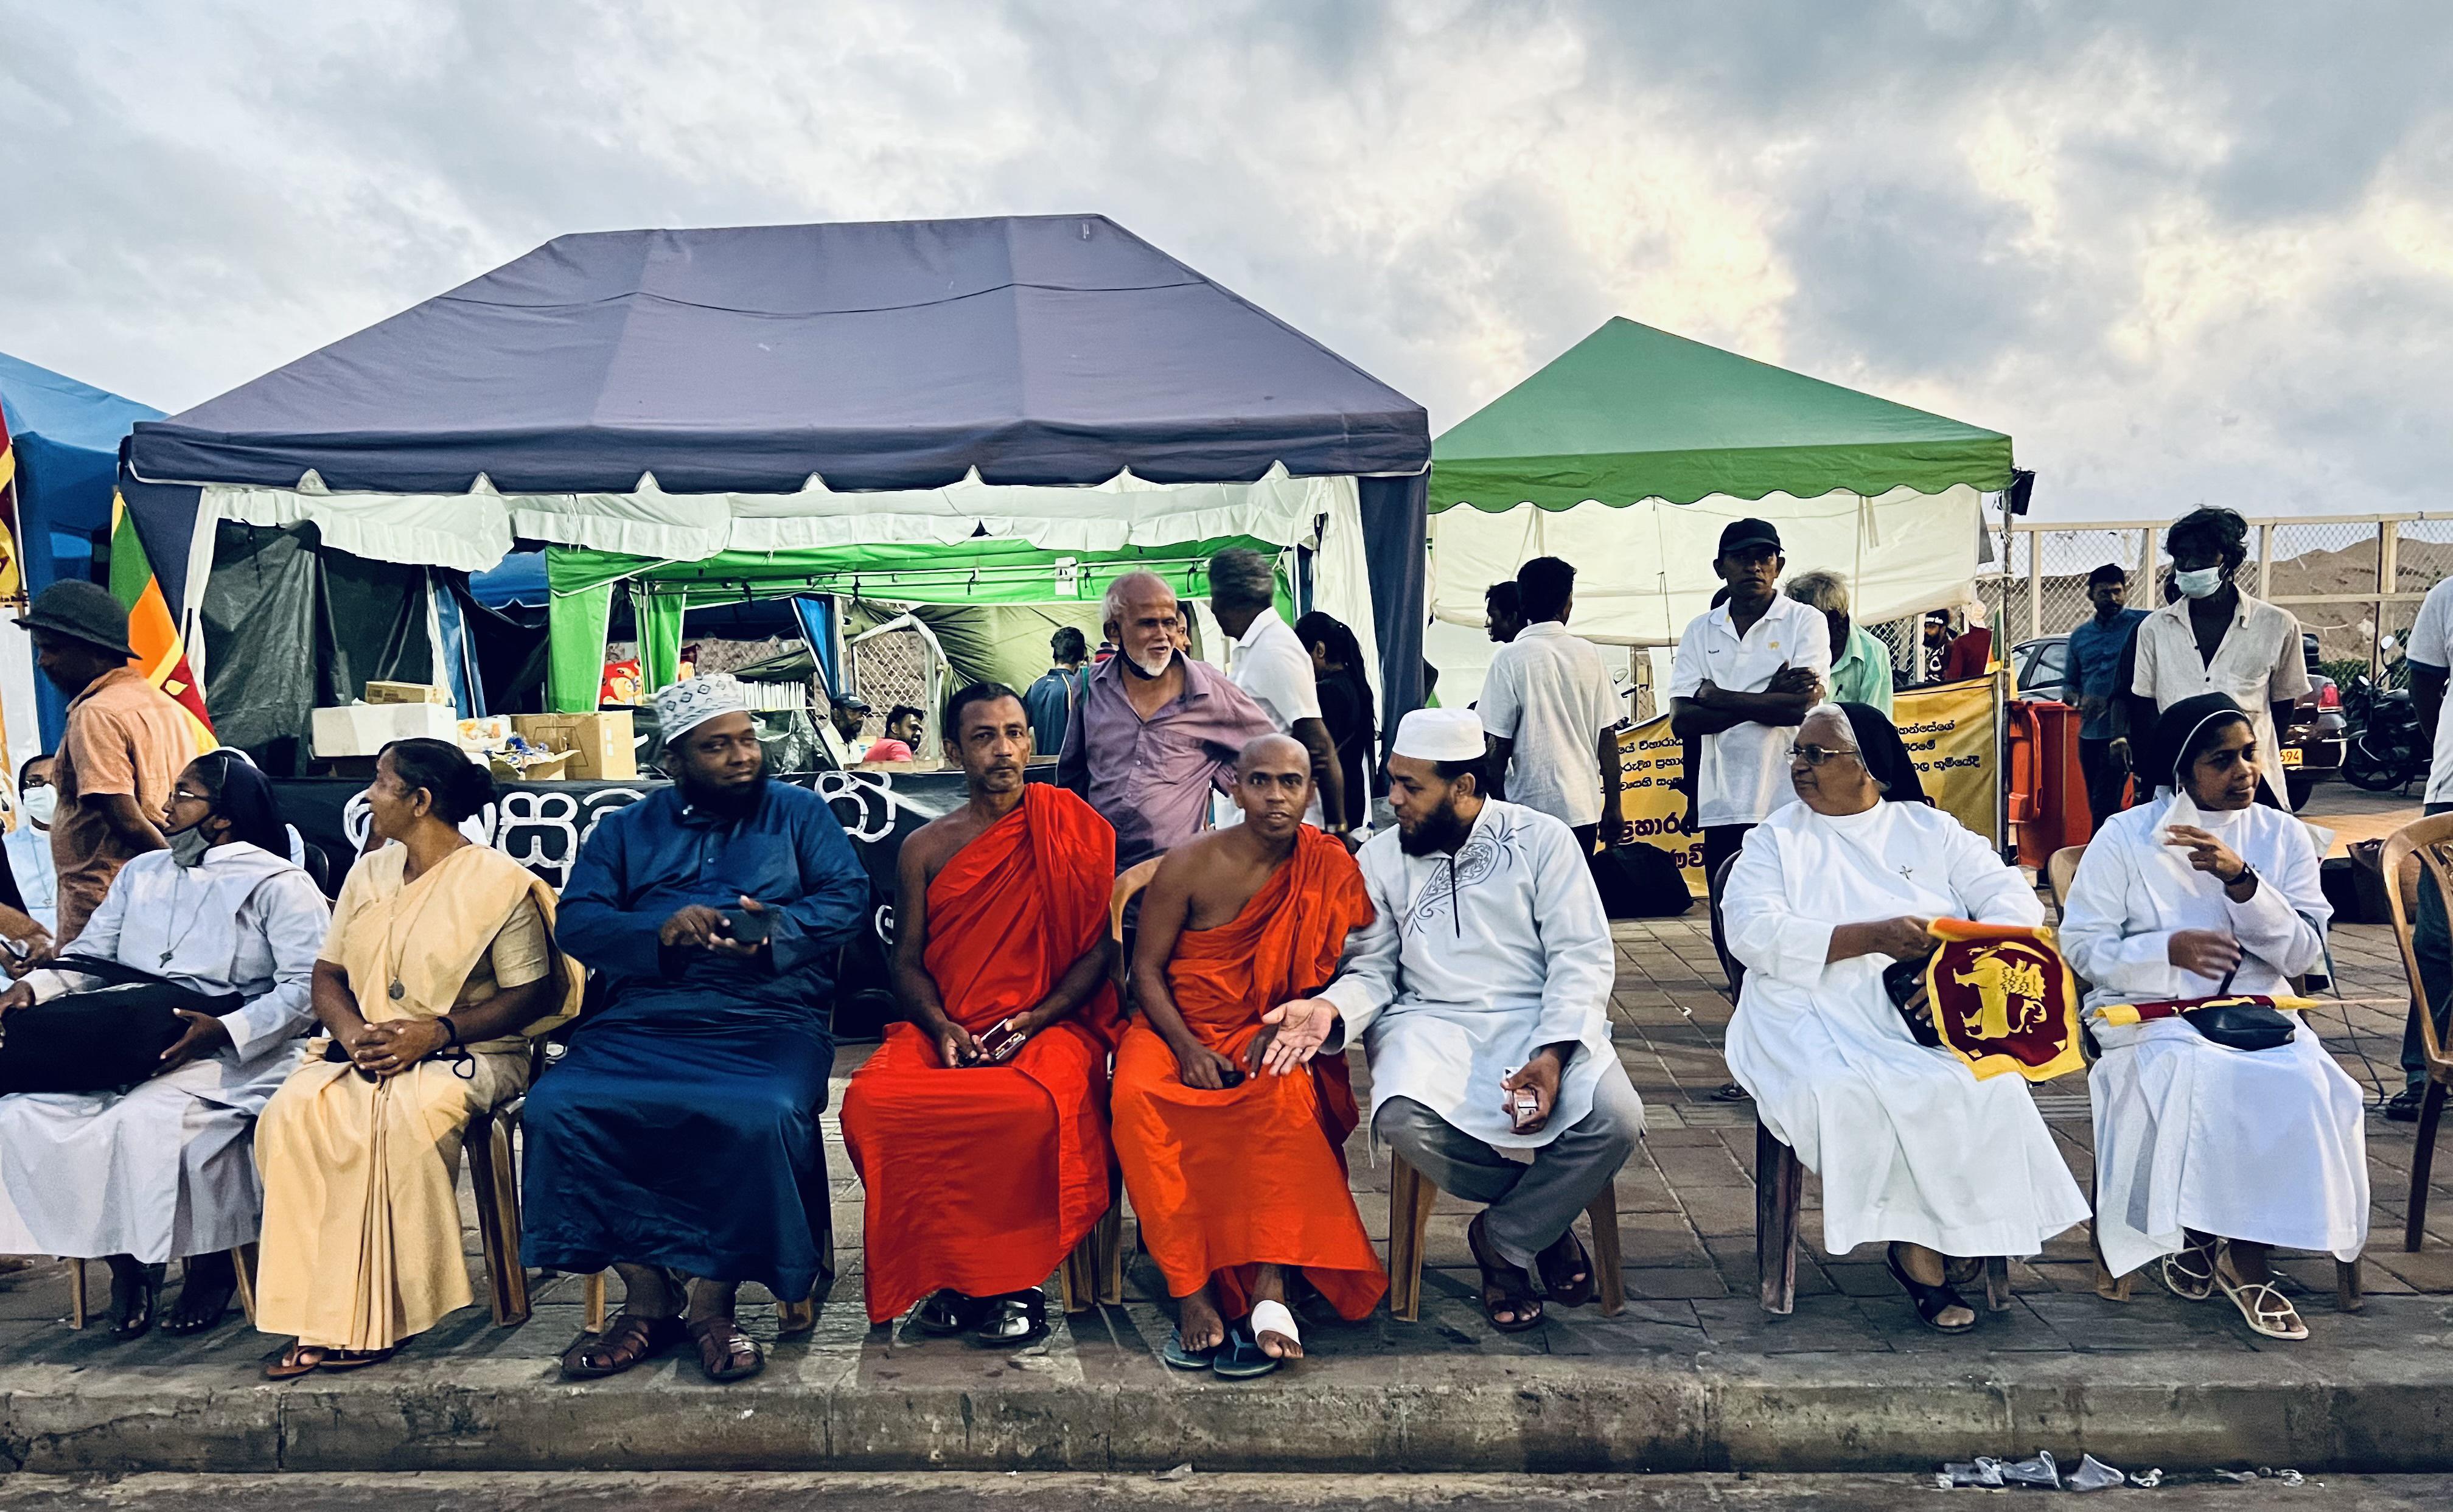 Photo of peaceful Sri Lanka protest with leaders from various religions shown together, taken by Marlon Ariyasinghe